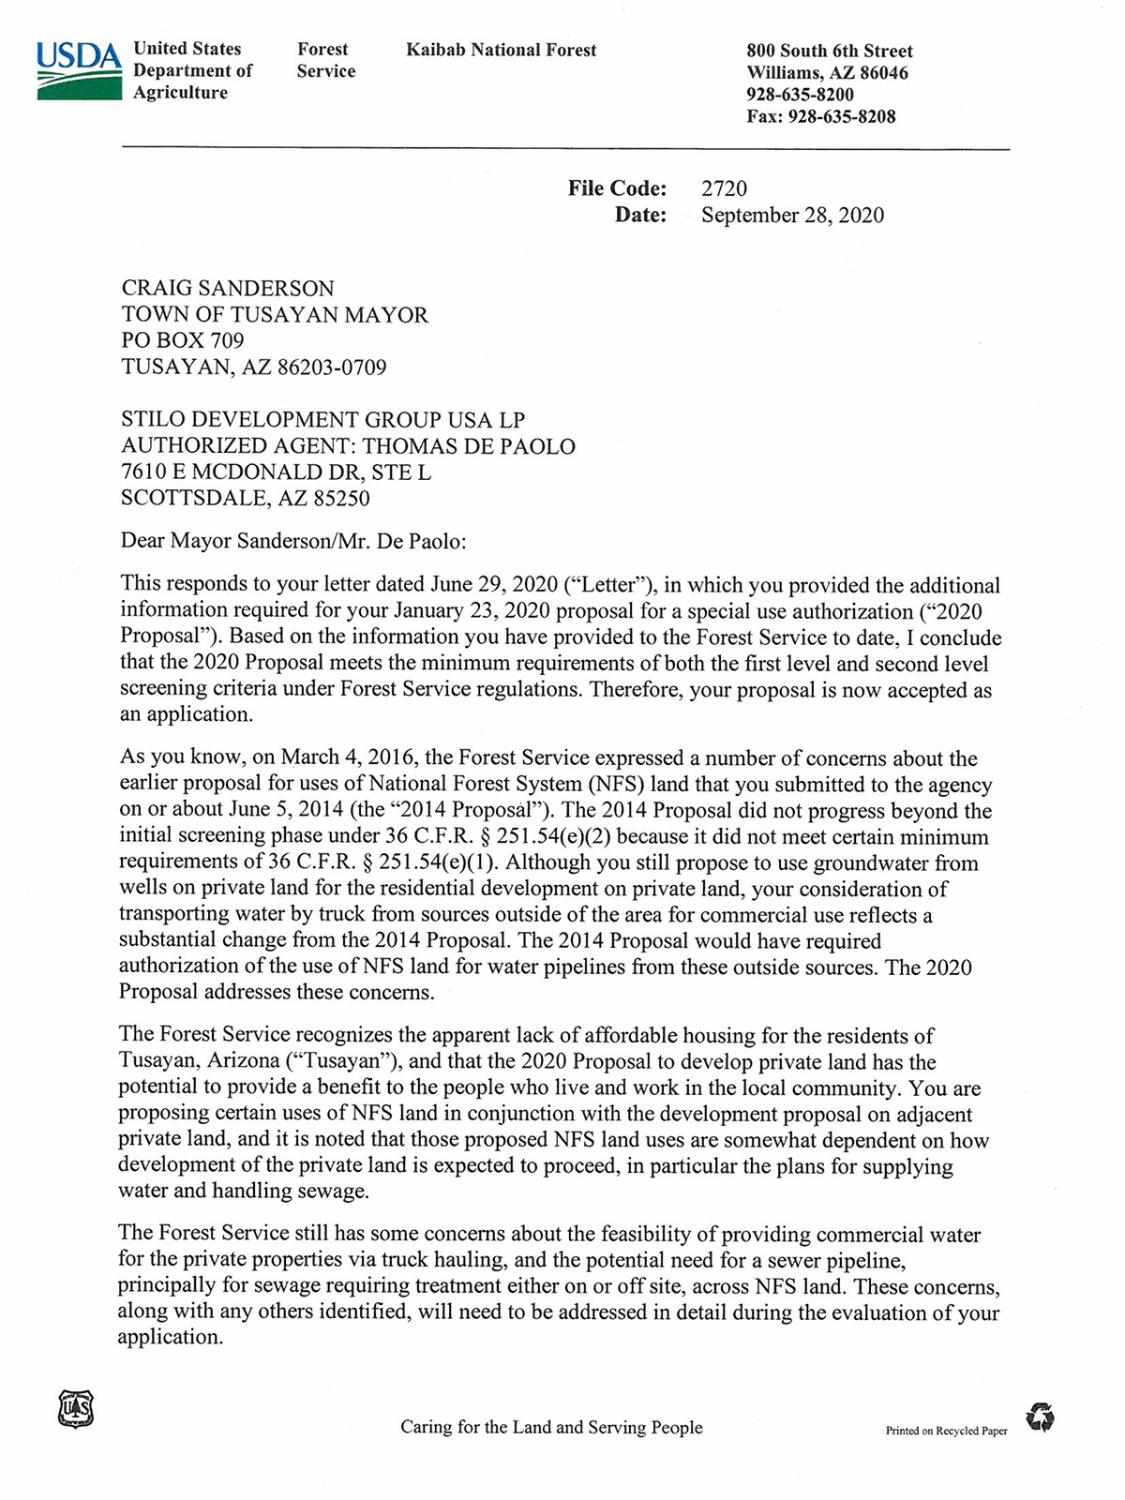 Forest Service letter to Tusayan